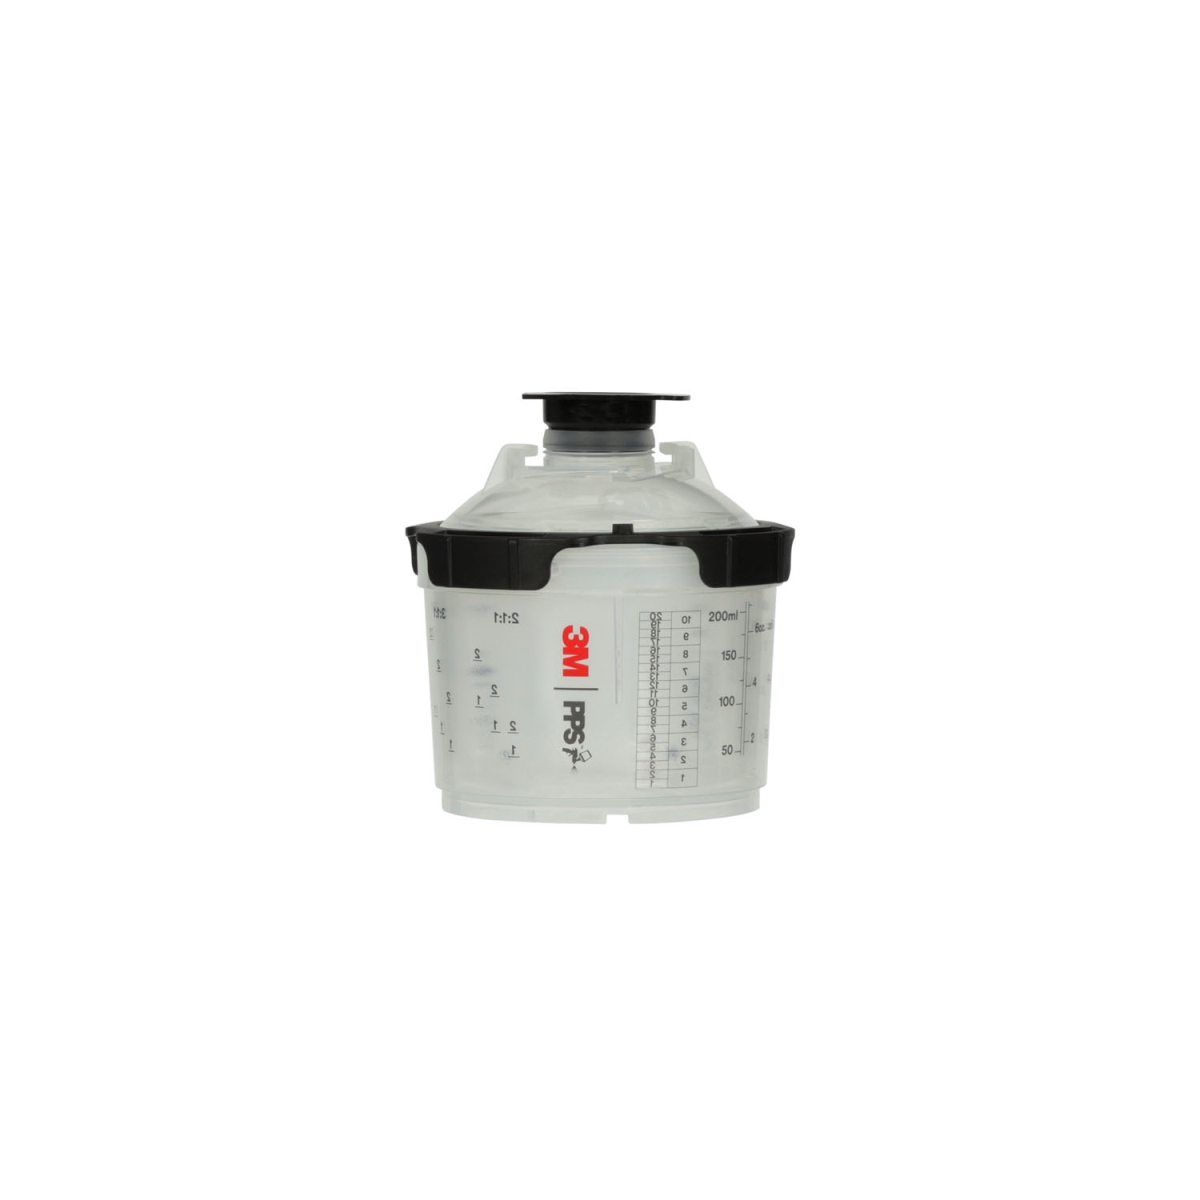 Picture of 3M 2PS-26114 6.8 oz PPS Series 2.0 Spray Cup System Kit with 200U Micron Filter - Mini